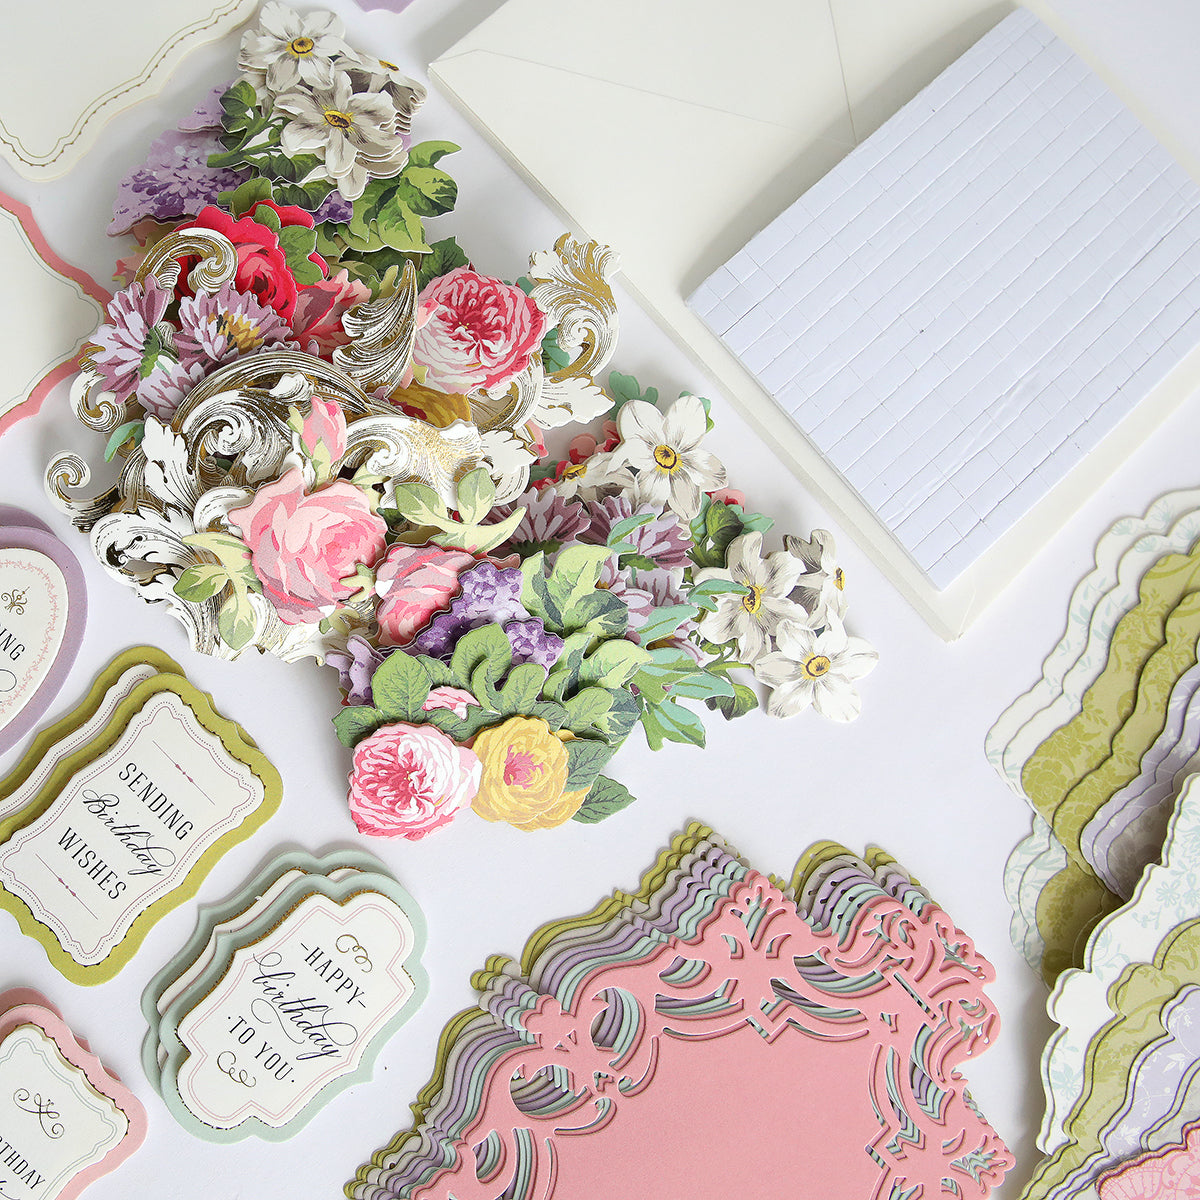 A colorful assortment of the Simply Birthday Easel Card Making Kit and papers are meticulously arranged on a table, showcasing the artistry and creativity of cardmaking. From elegant birthday easel card kits to other delightful designs, this